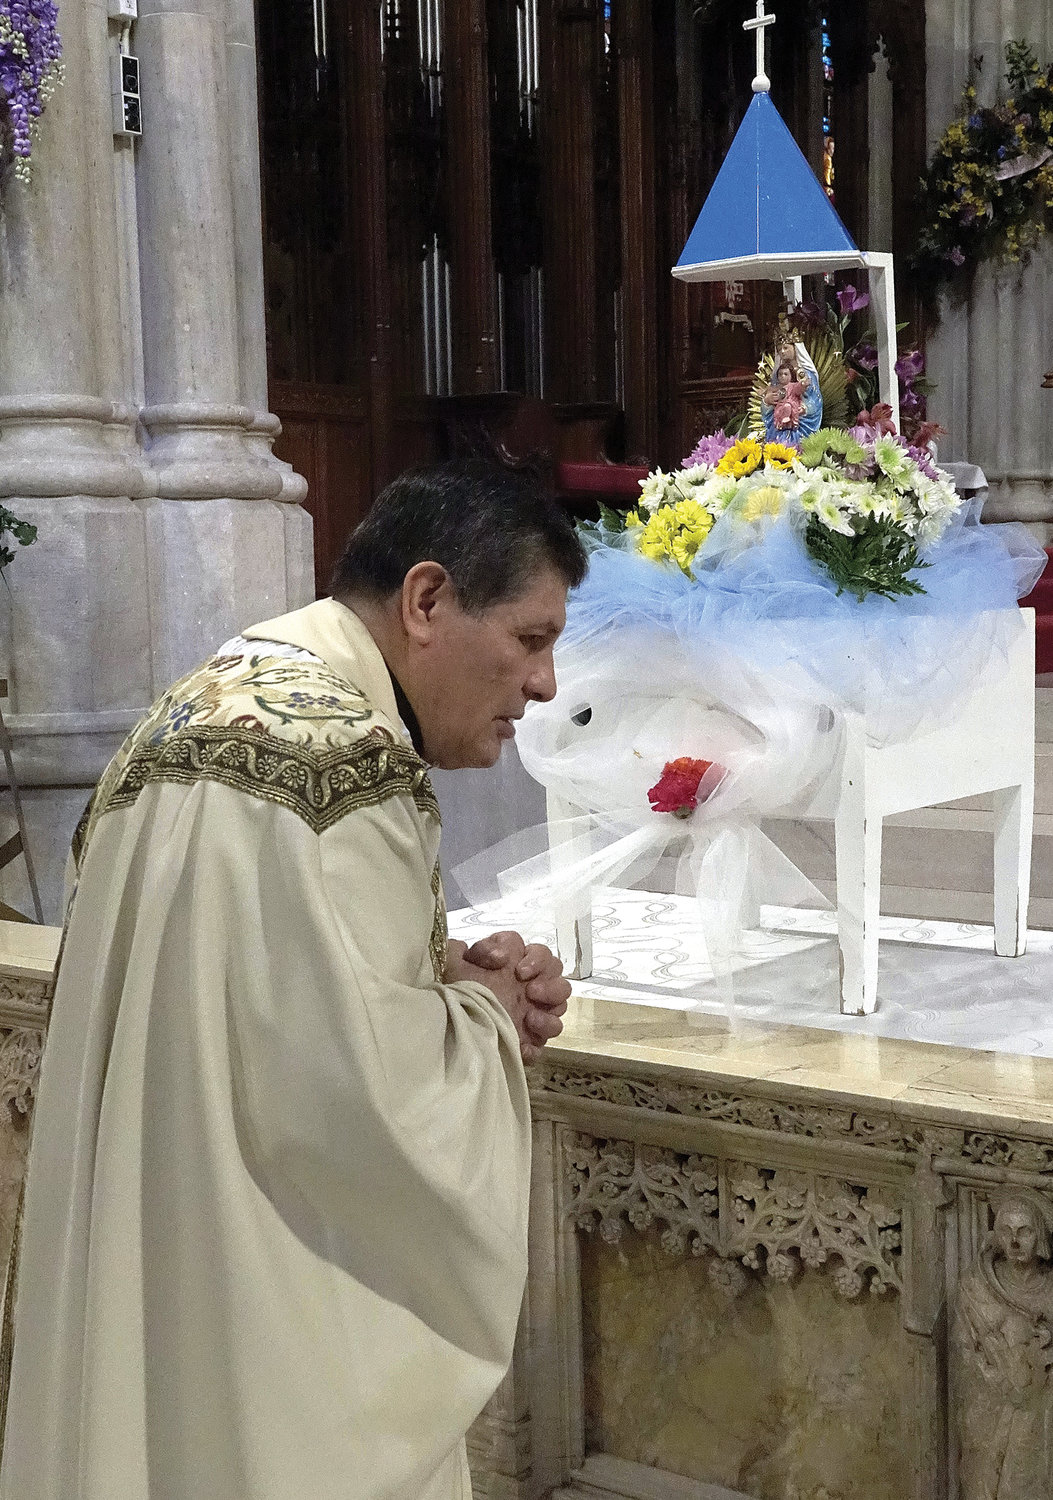 Father Lorenzo Ato, above left, prays before an image of Our Lady of Rocío before celebrating the May 29 Spanish-language Mass honoring Mary at St. Patrick’s Cathedral. Our Lady of El Rocío, whose shrine in Ecuador attracts thousands of pilgrims every year, is a Marian devotion with origins dating to 17th-century Spain.